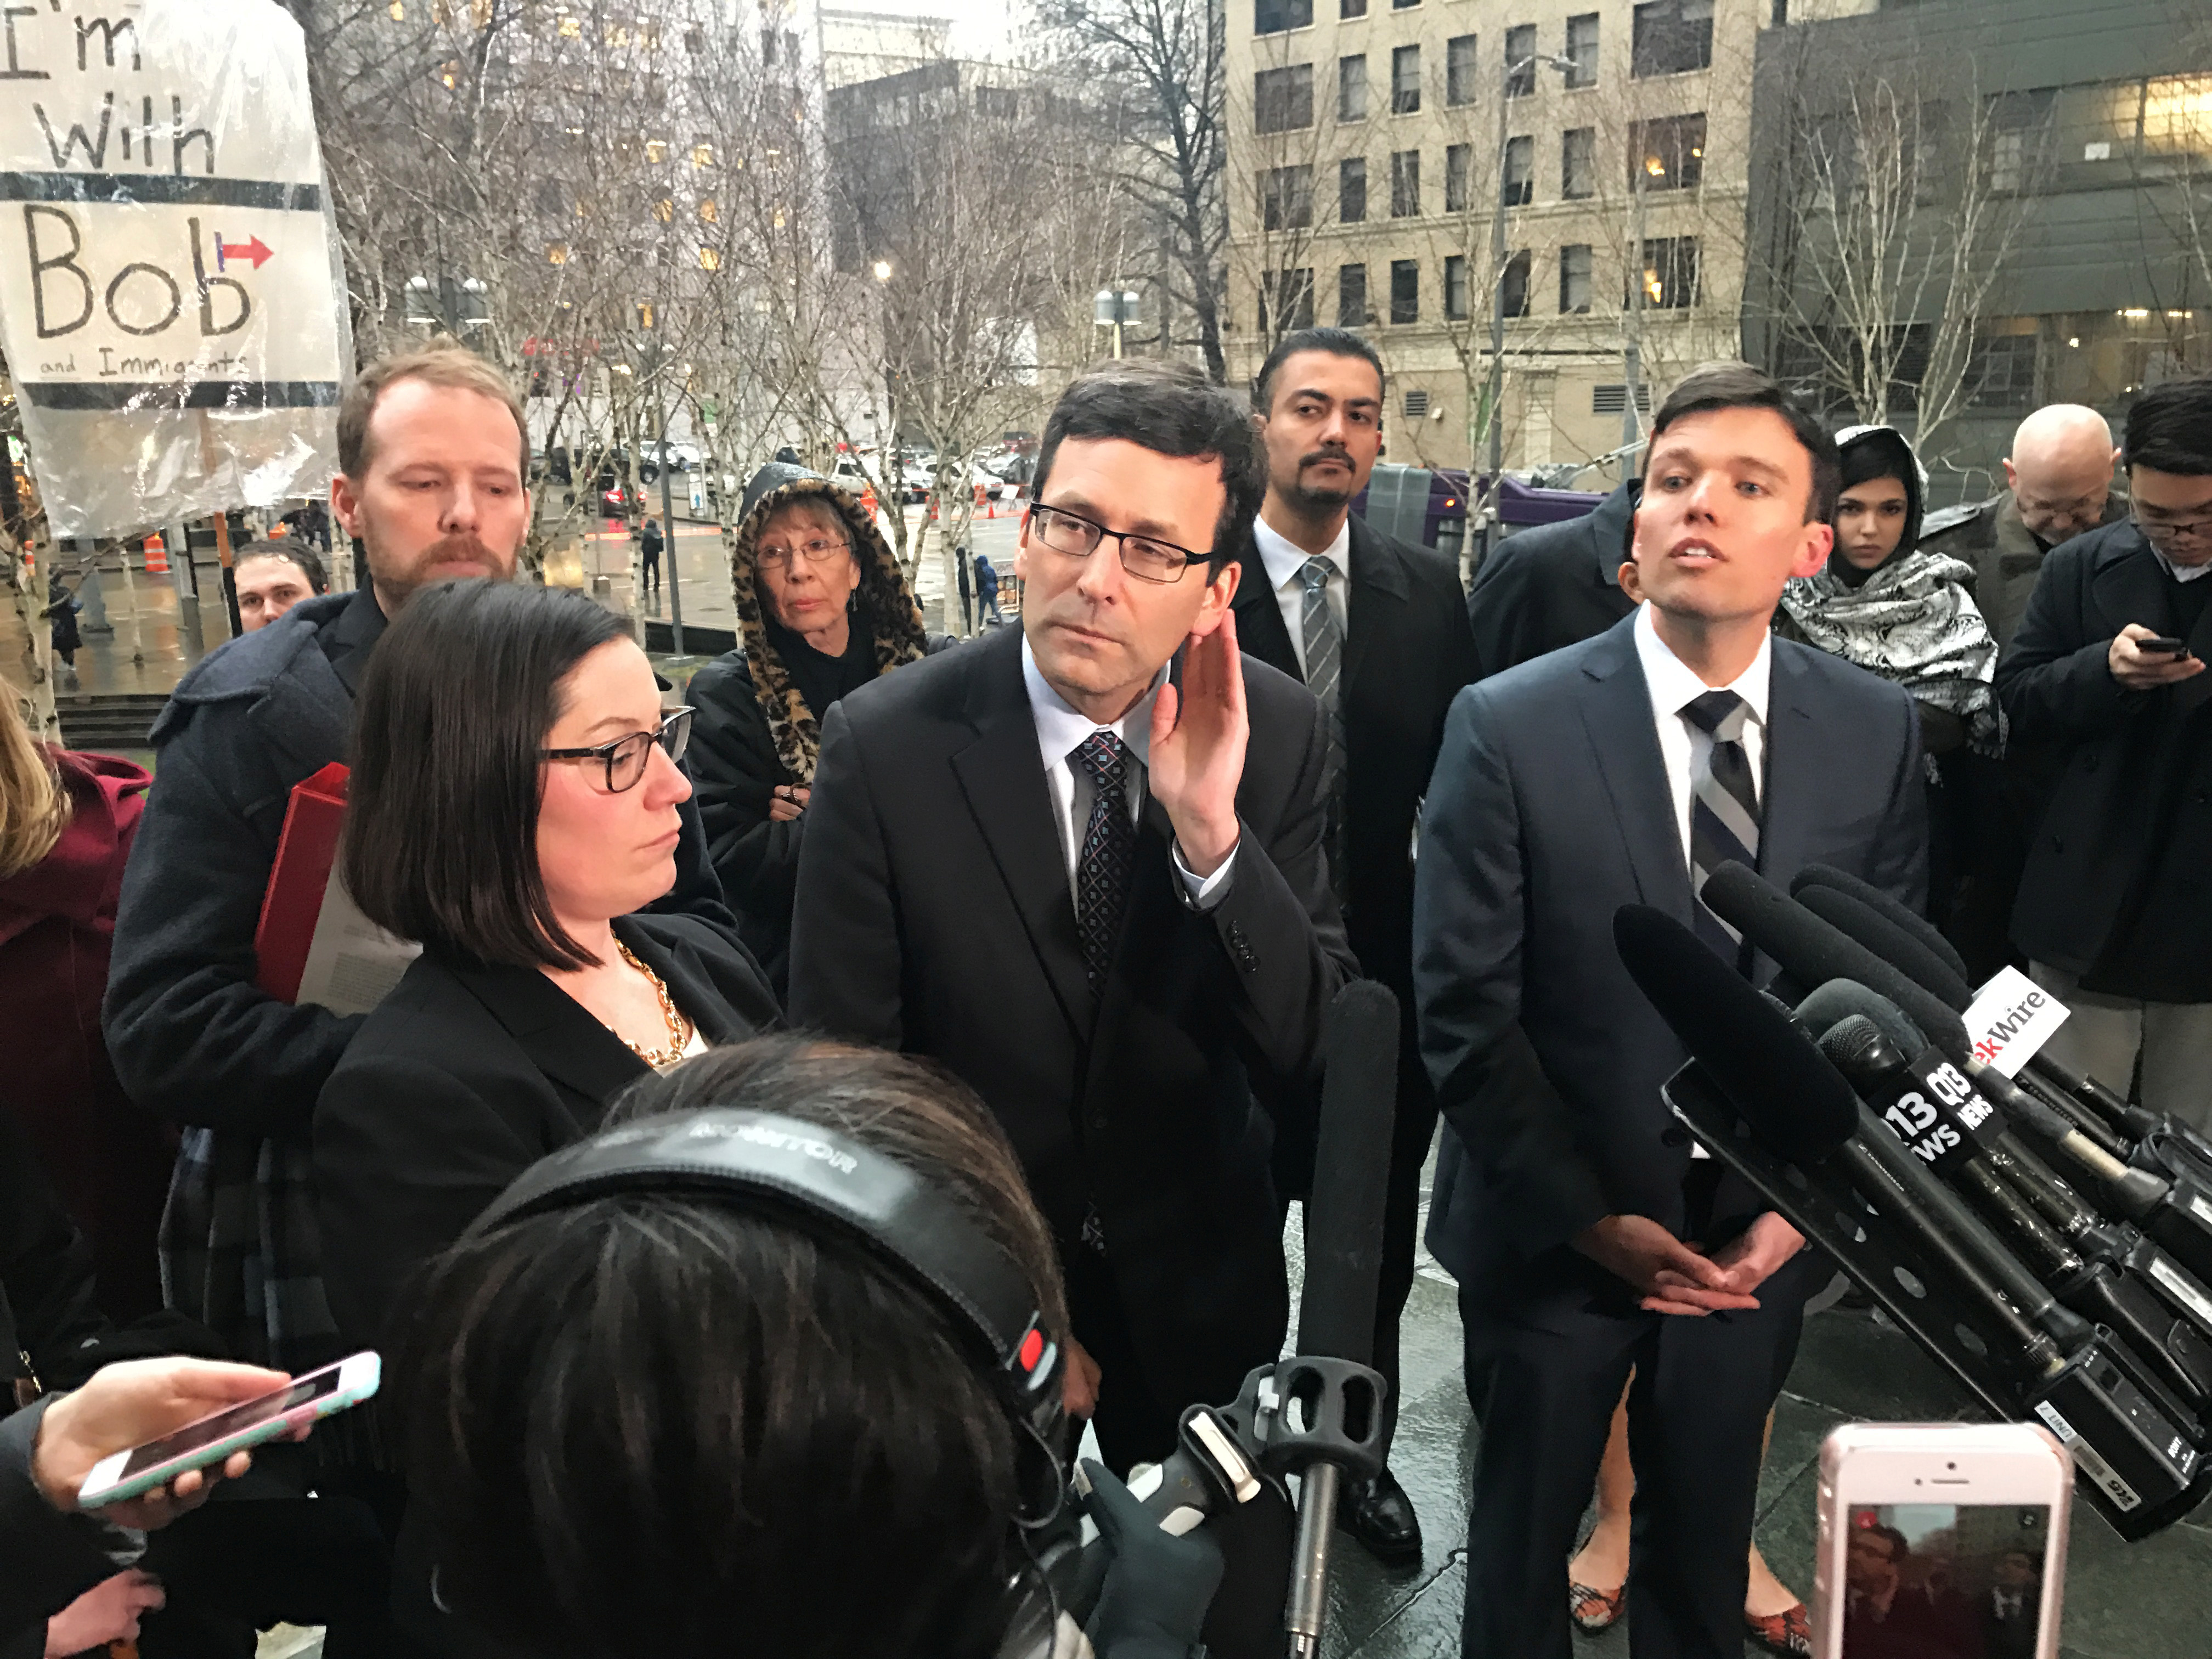 Washington state's attorney general Bob Ferguson (C) speaks to the media next to Washington state solicitor general Noah Purcell (R) outside the U.S. federal courthouse in downtown Seattle